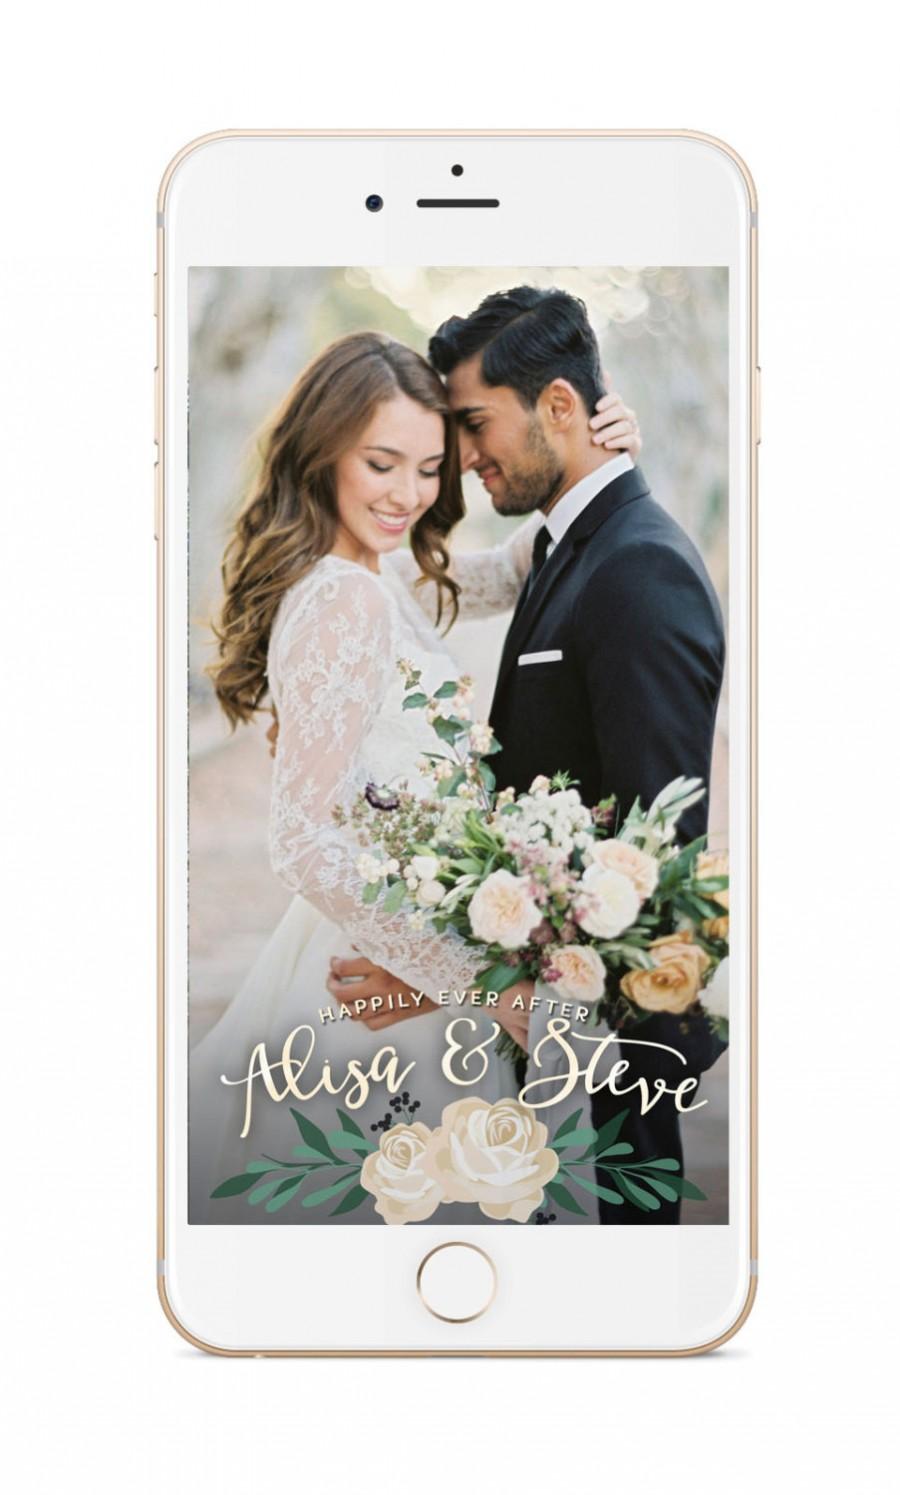 Mariage - Wedding Snapchat Geofilter Wedding Geofilter Personalized filter Customized Names On Demand GeoFilter Wedding Decorations Geofilter Party